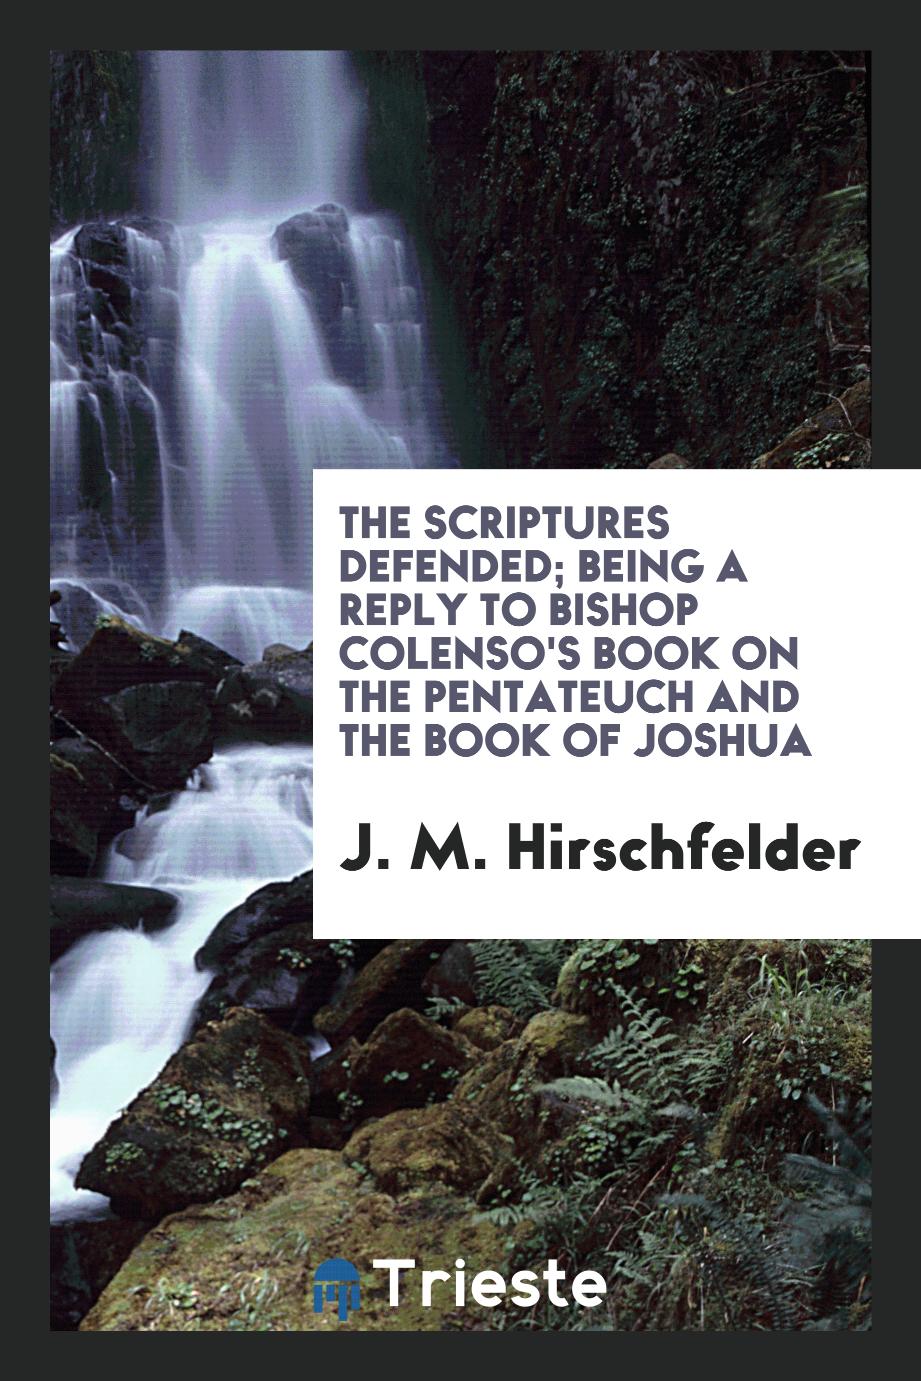 The Scriptures defended; being a reply to Bishop Colenso's book on the Pentateuch and the Book of Joshua